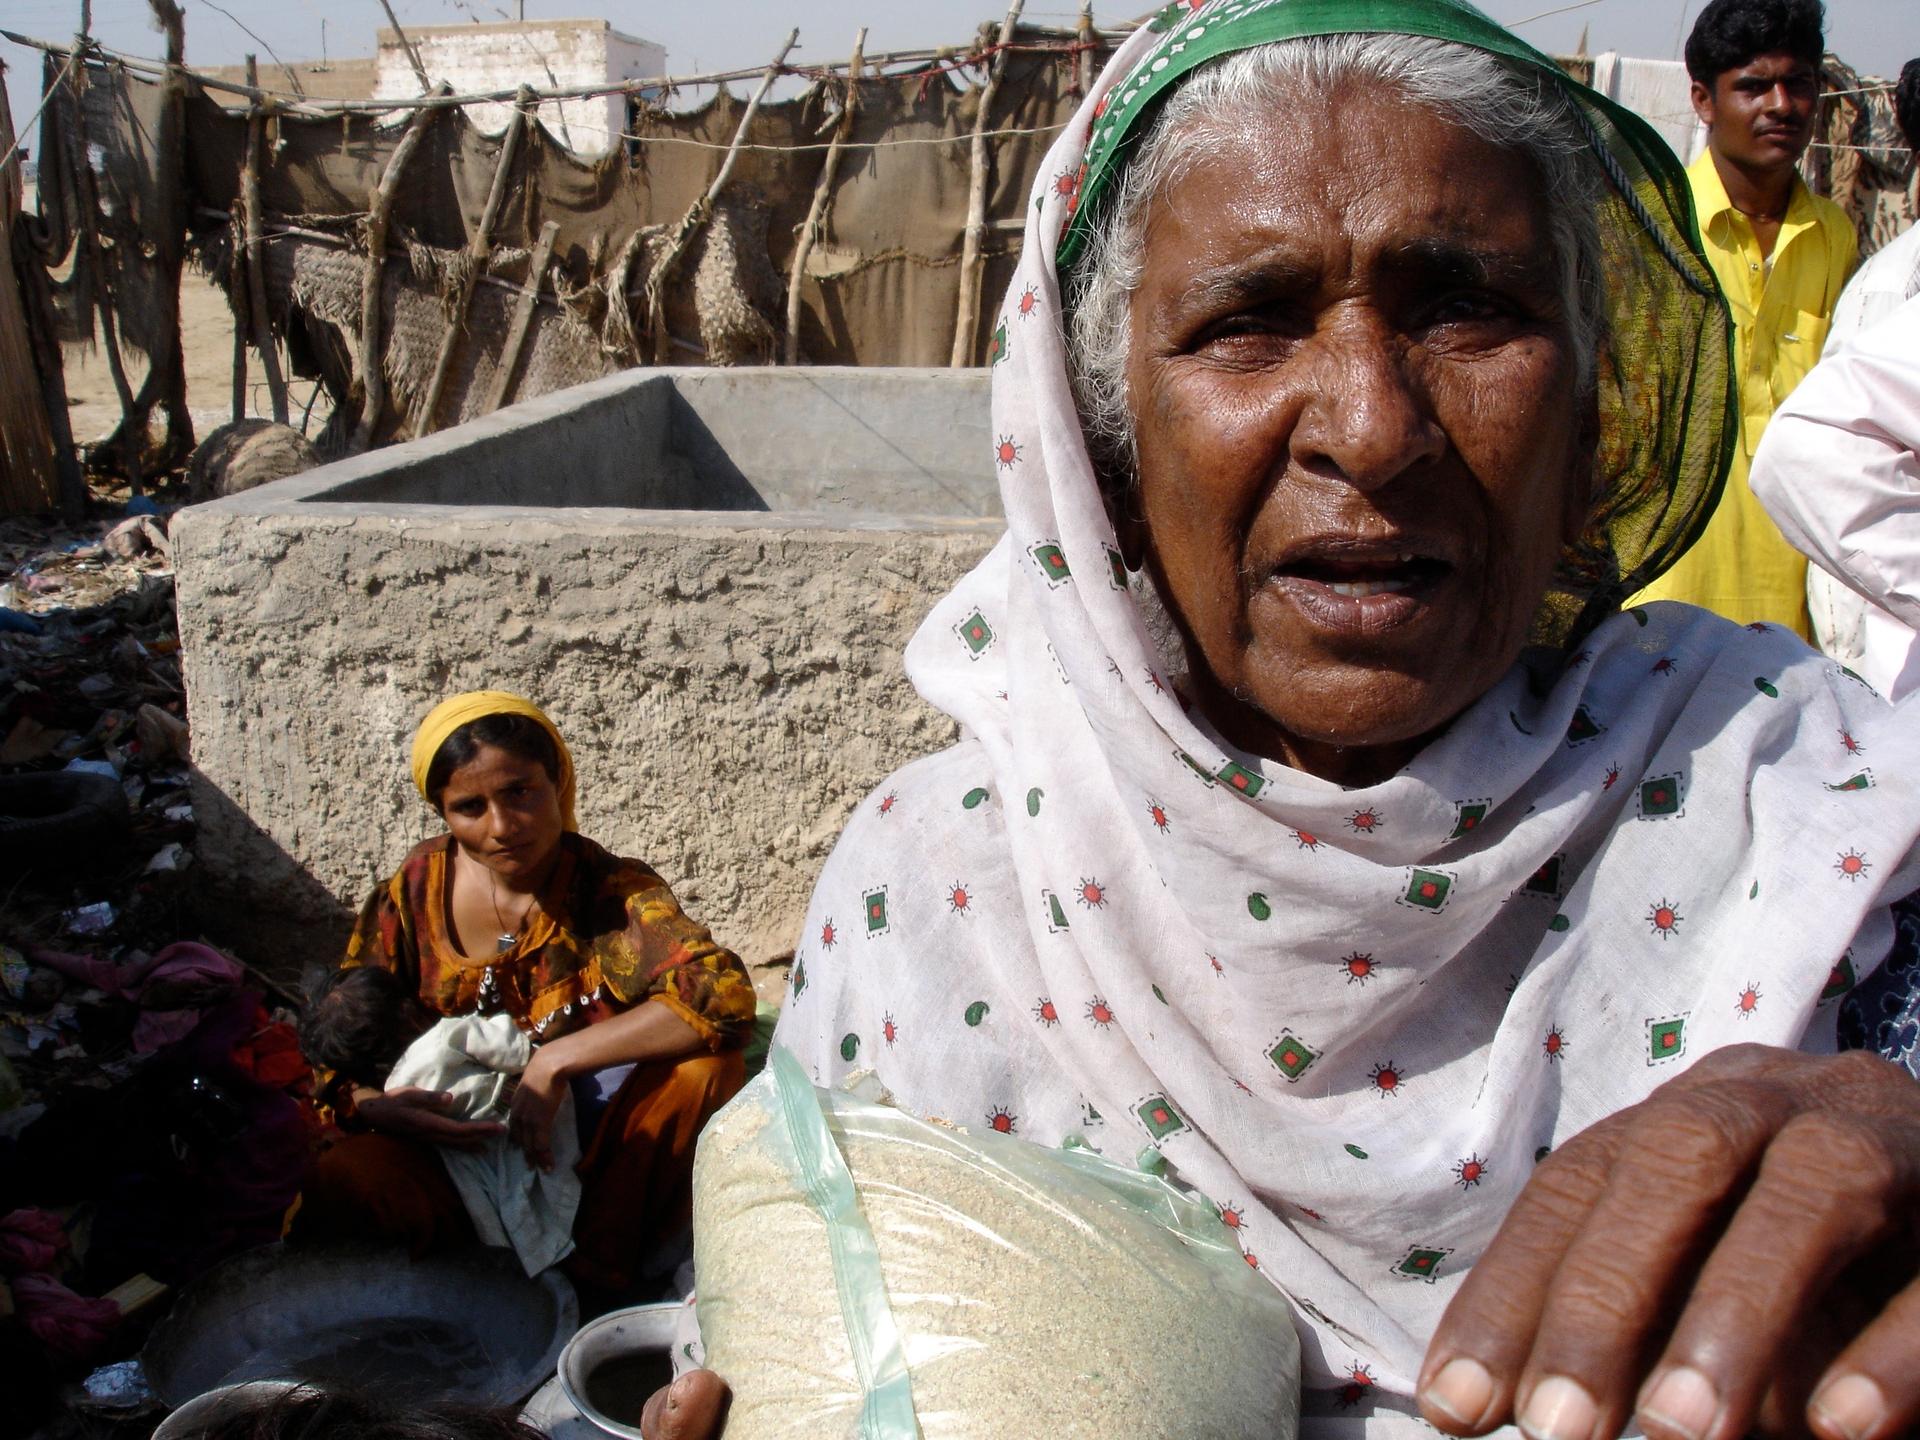 This Pakistani woman lives in extreme poverty; 60 percent of Pakistanis live on less than $2 per person per day.